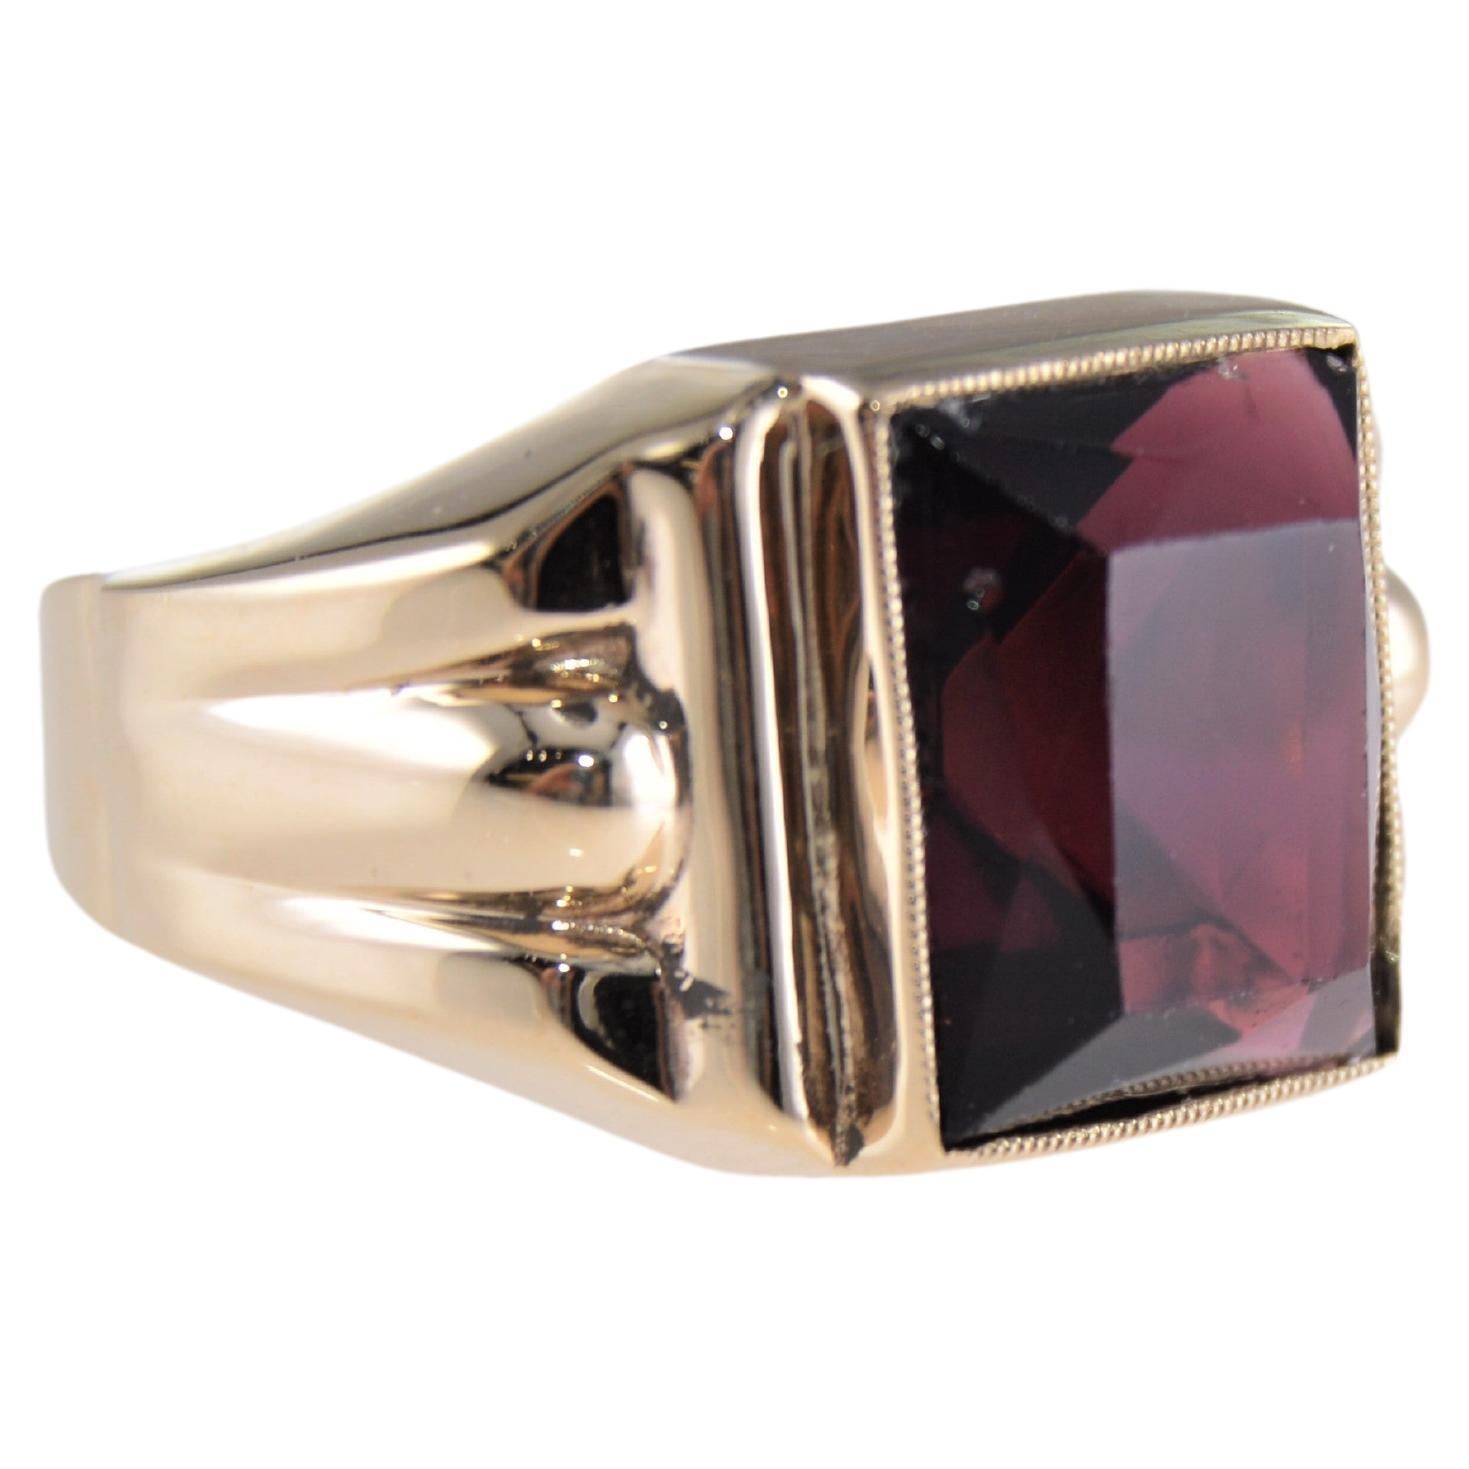 STYLE / REFERENCE: Art Deco
METAL / MATERIAL: 10Kt. Solid Gold
CIRCA / YEAR: 1940's
STONE: Synthetic Ruby
SIZE: 9

This unique hand made ring is set with a synthetic ruby and done in the Art Deco Style. The workmanship is excellent and the ring is